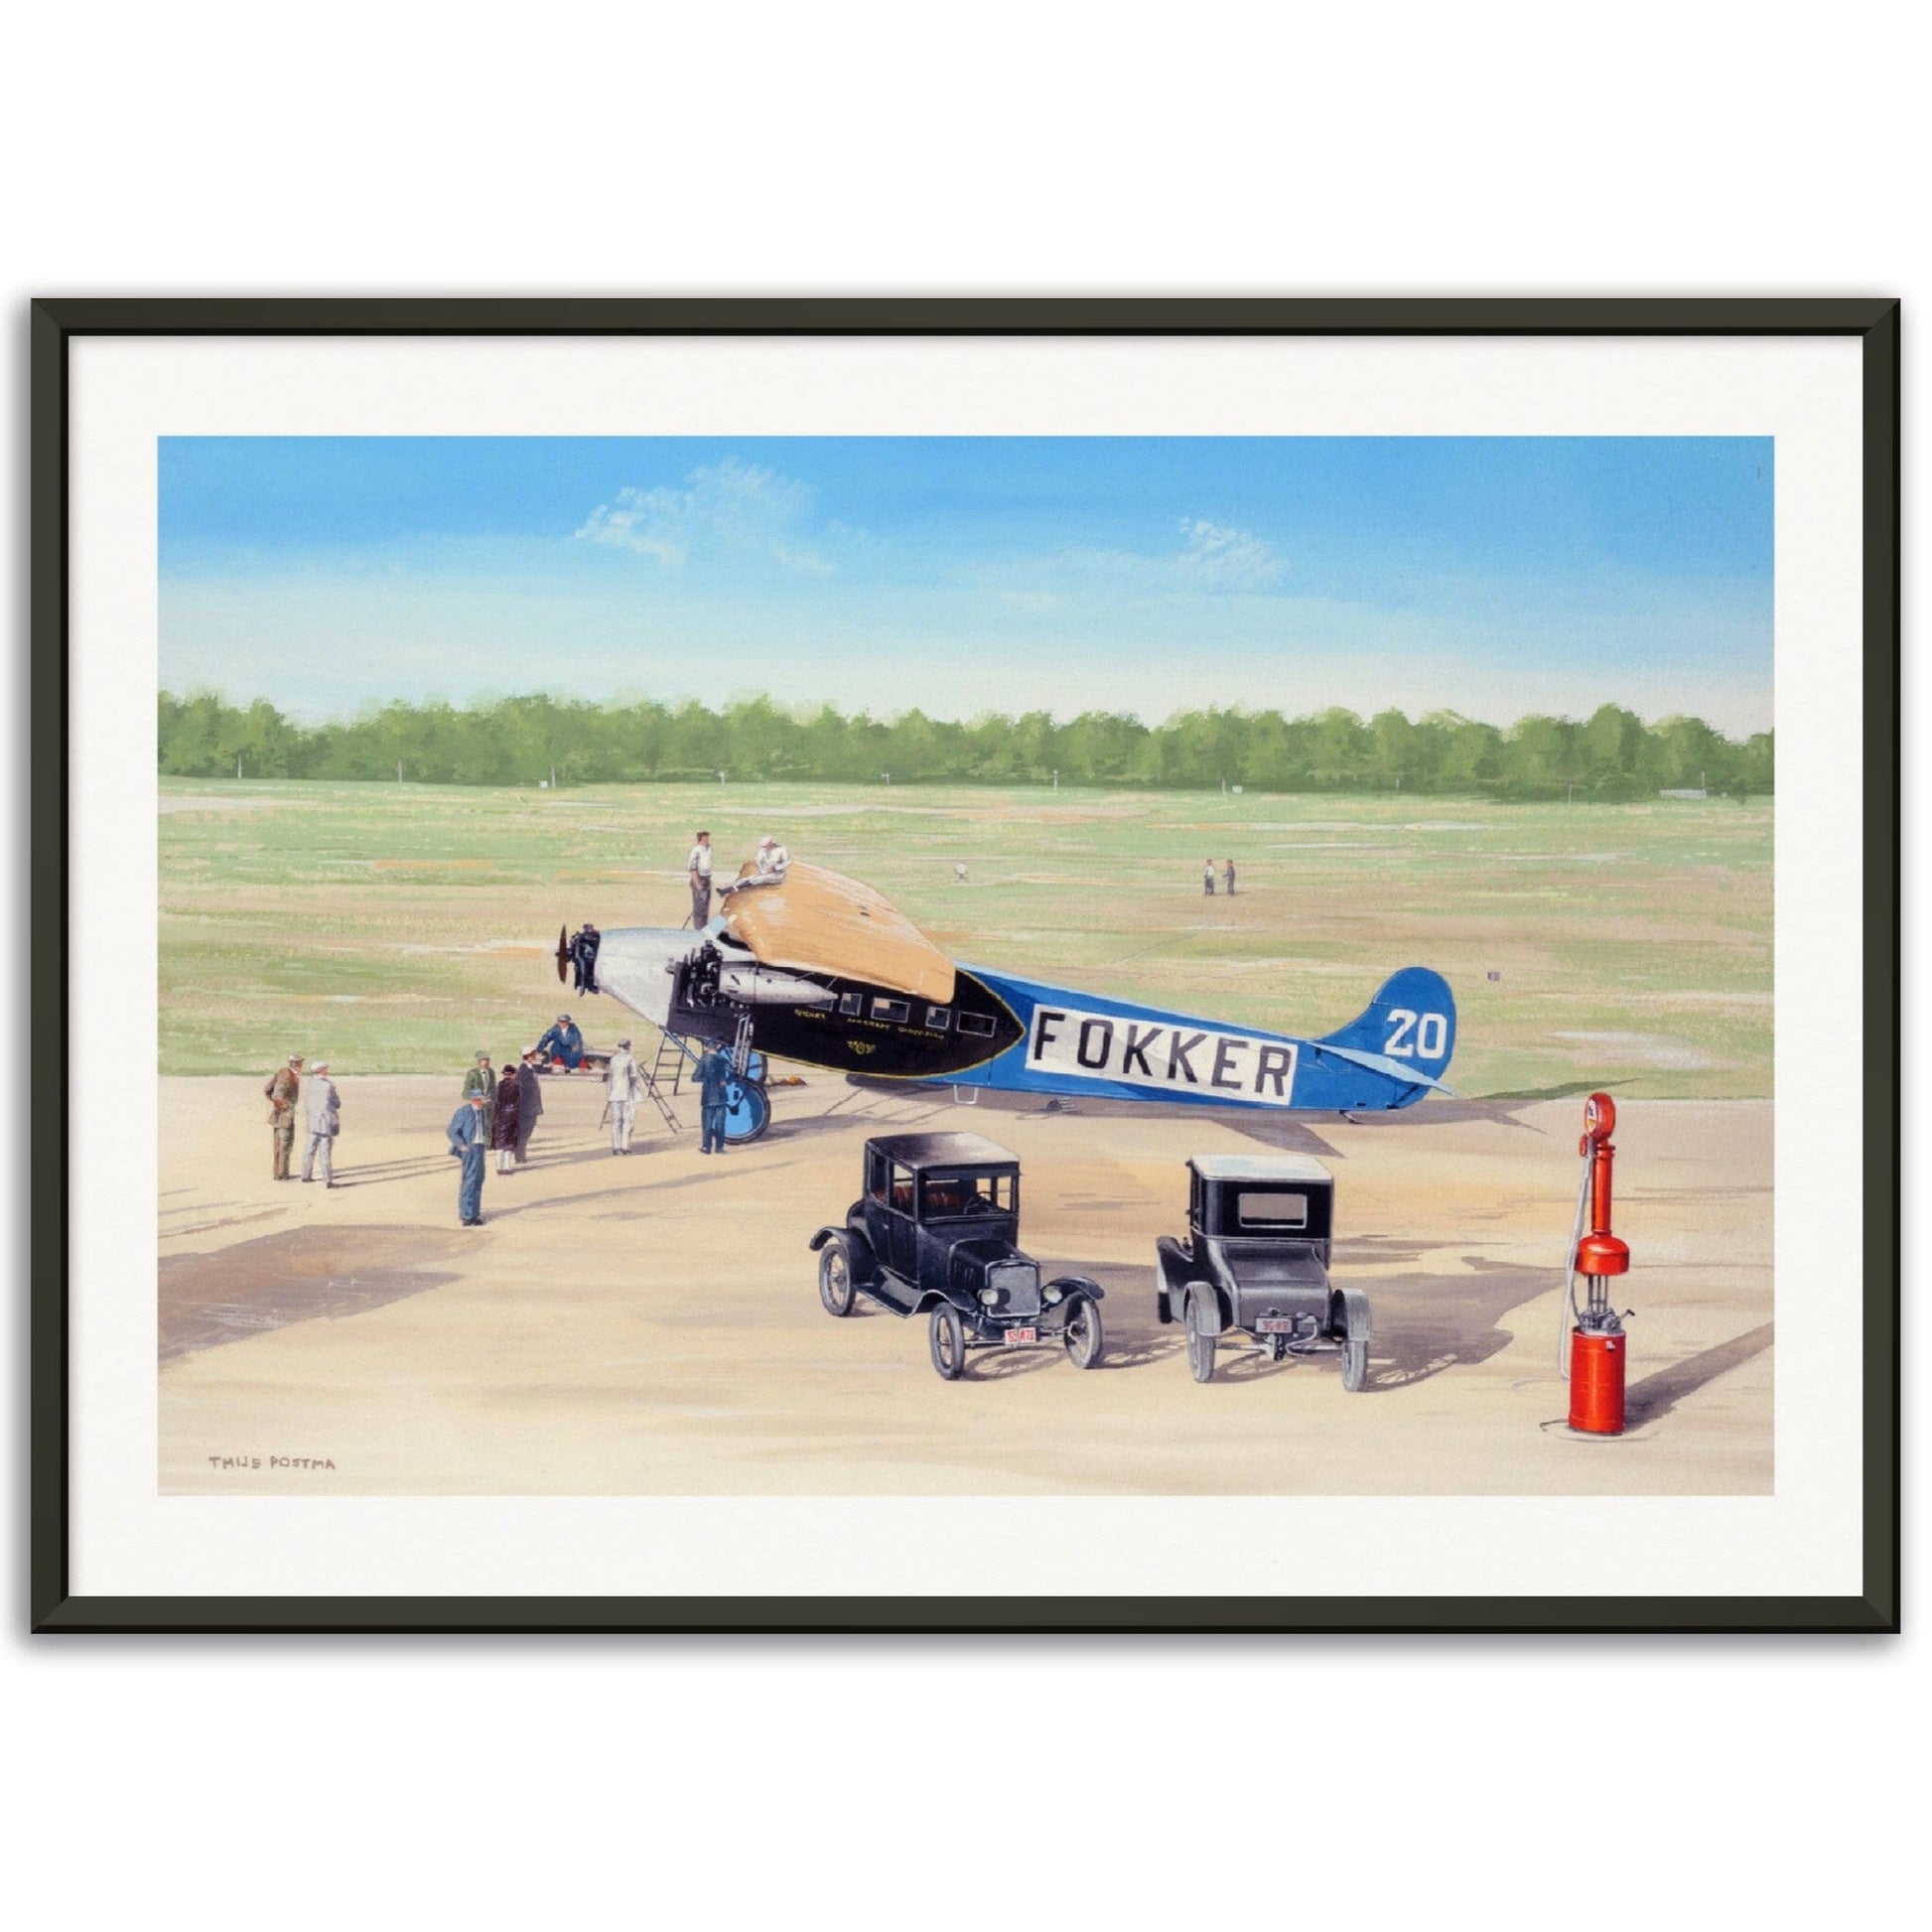 Thijs Postma - Poster - Fokker F.7/3m During Ford Reliability Tour - Metal Frame Poster - Metal Frame TP Aviation Art 50x70 cm / 20x28″ 